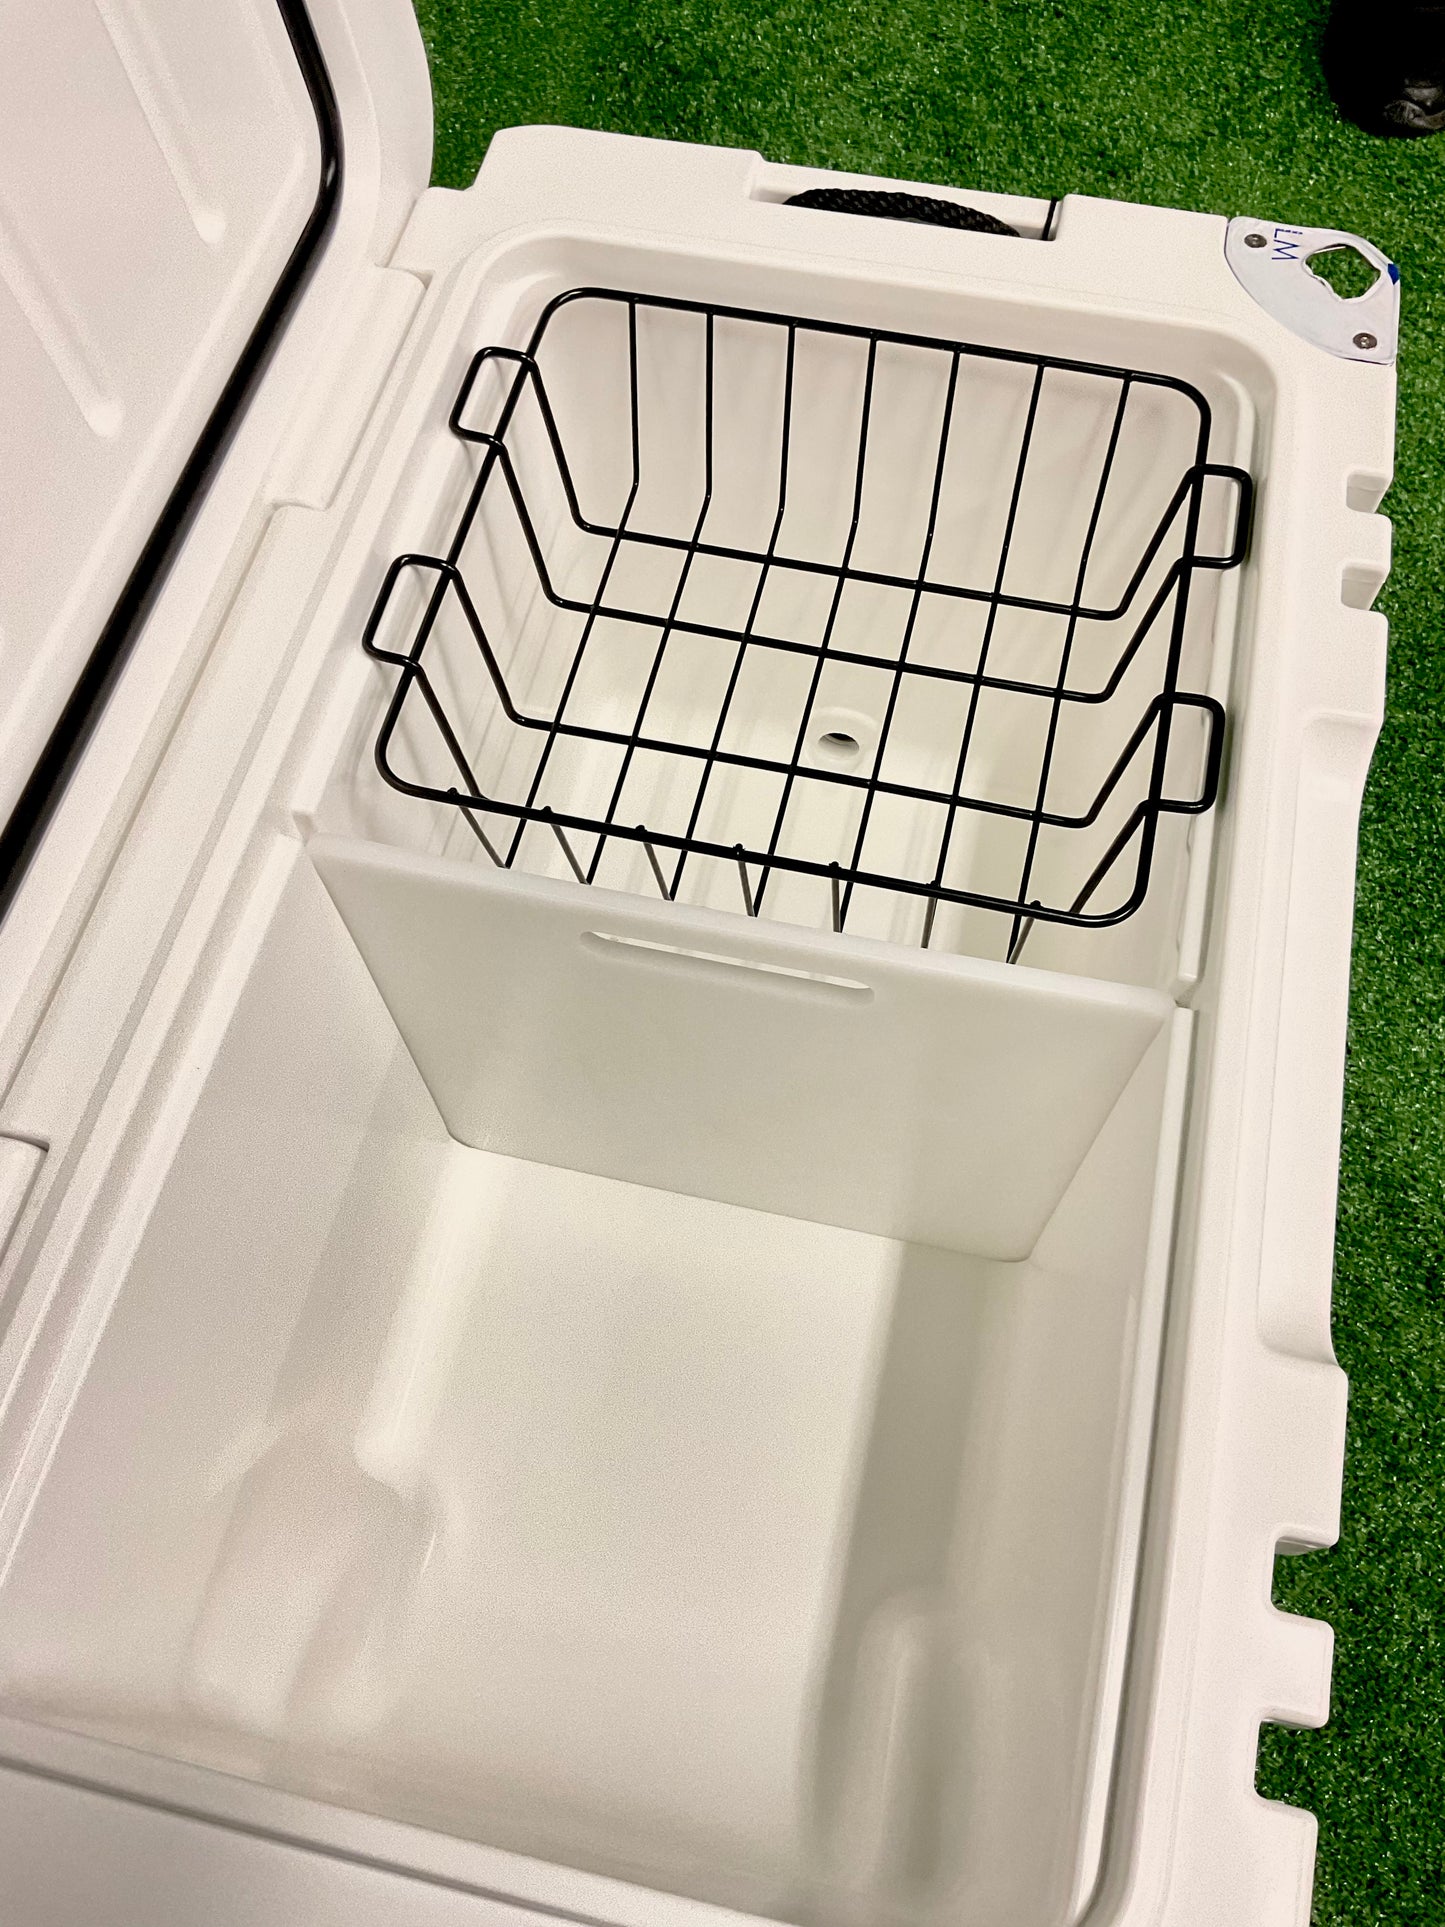 Cooler Basket - please match to cooler size